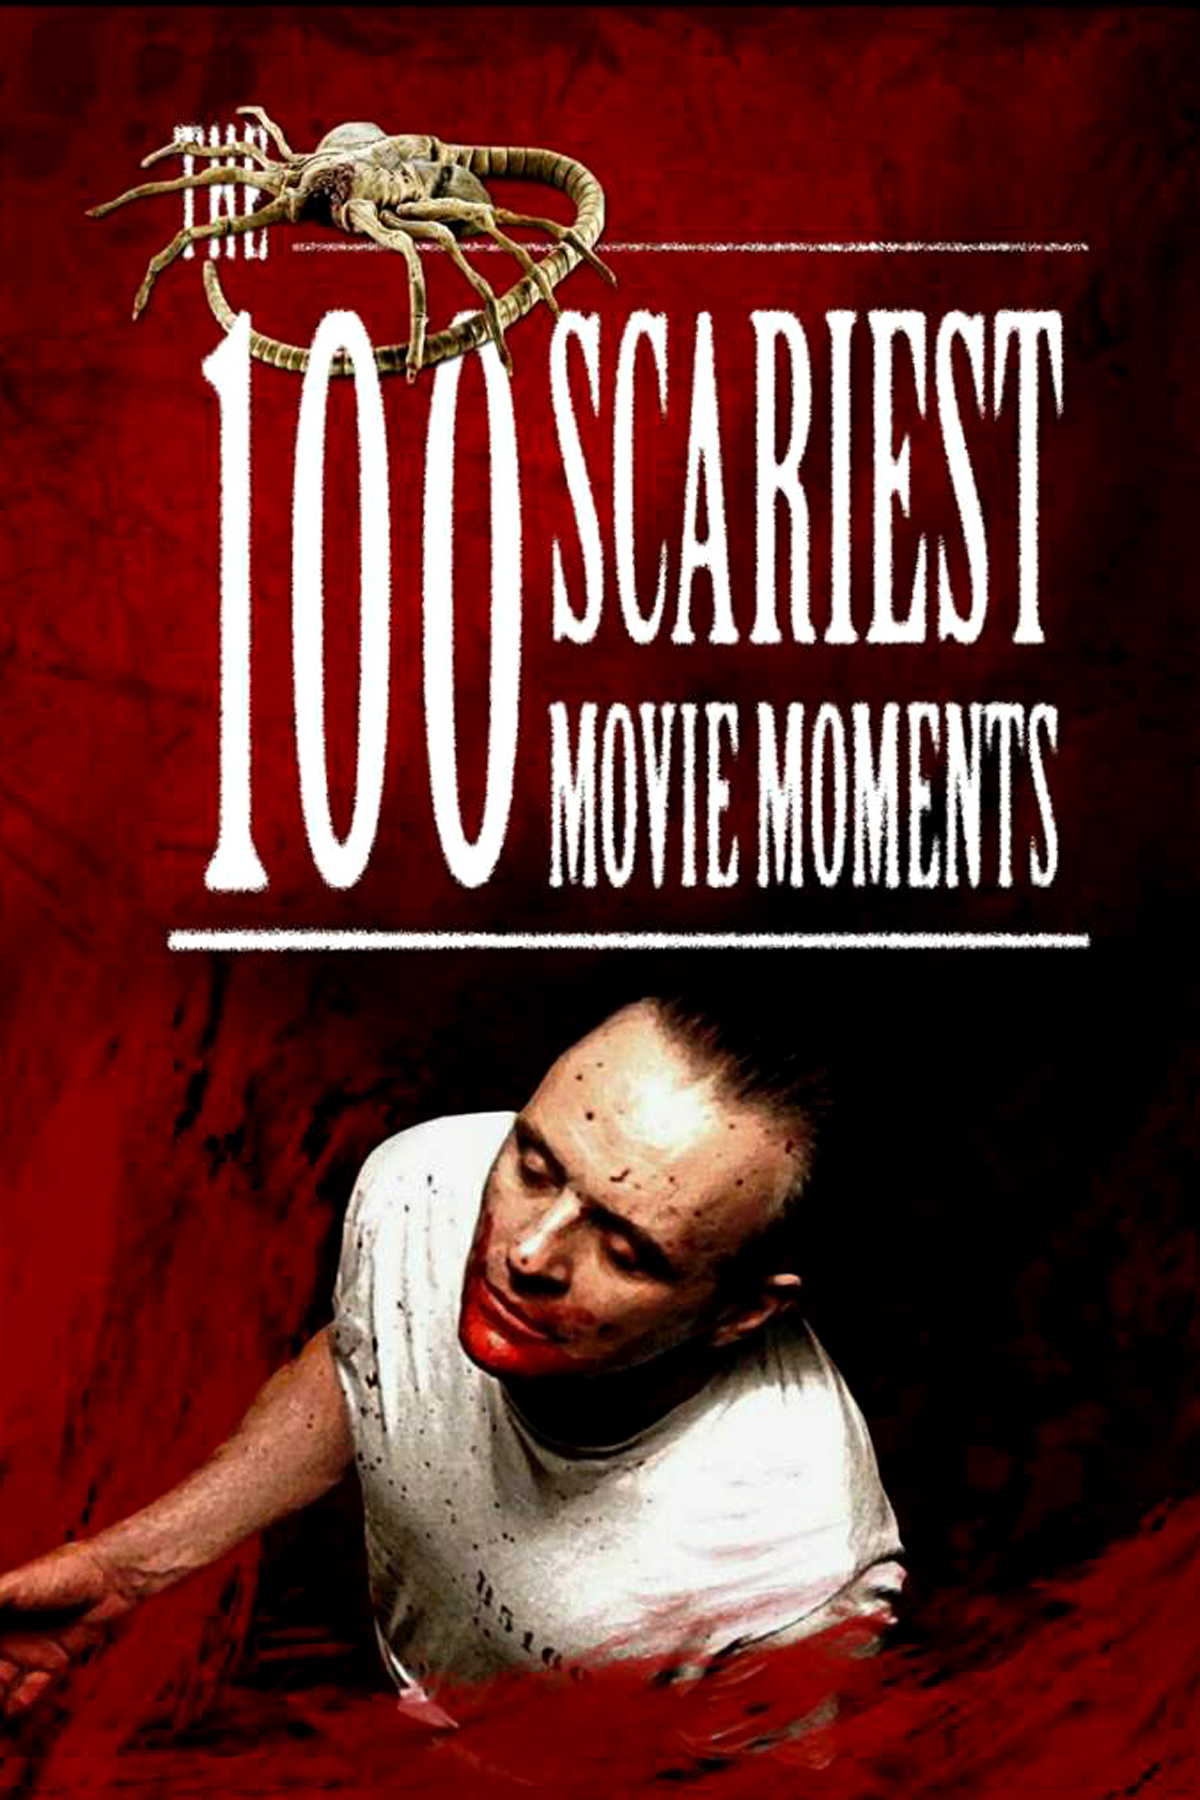 The 100 Scariest Movie Moments